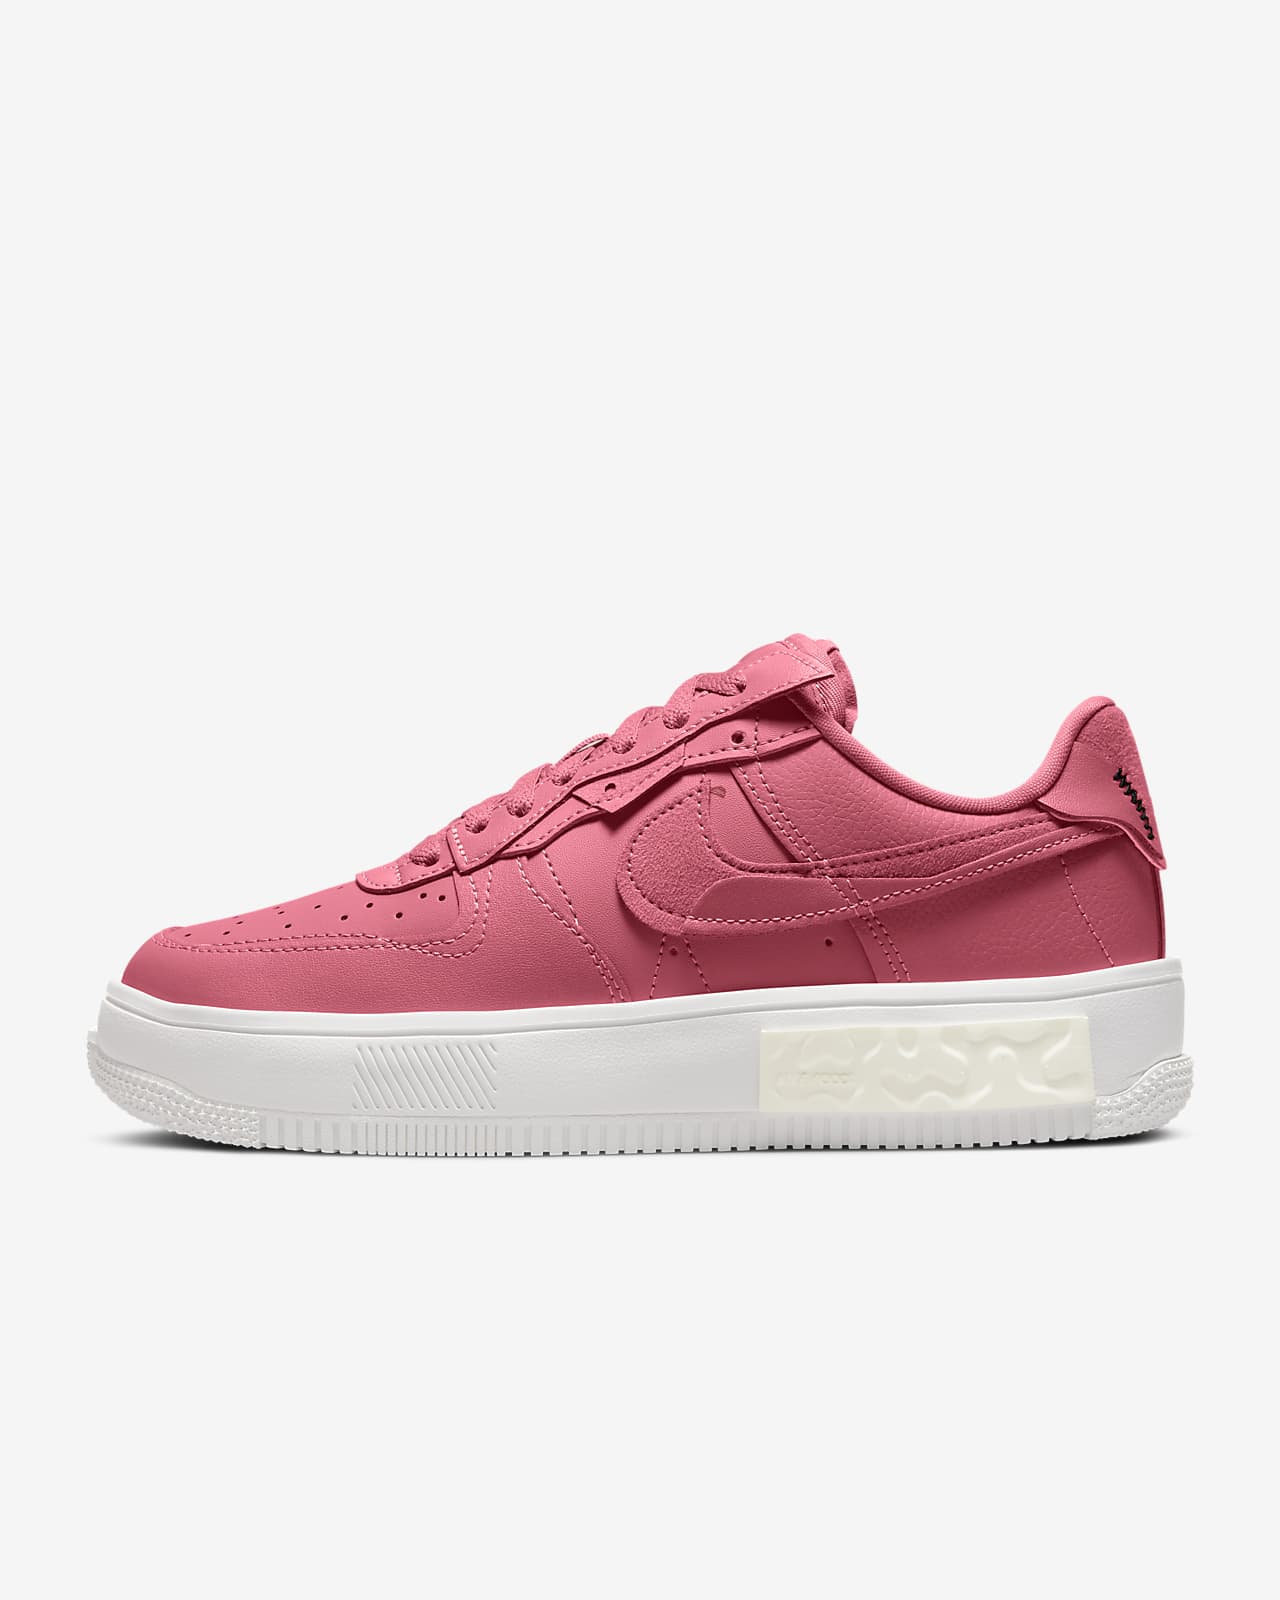 air force 1 07 donna rosse e bianche